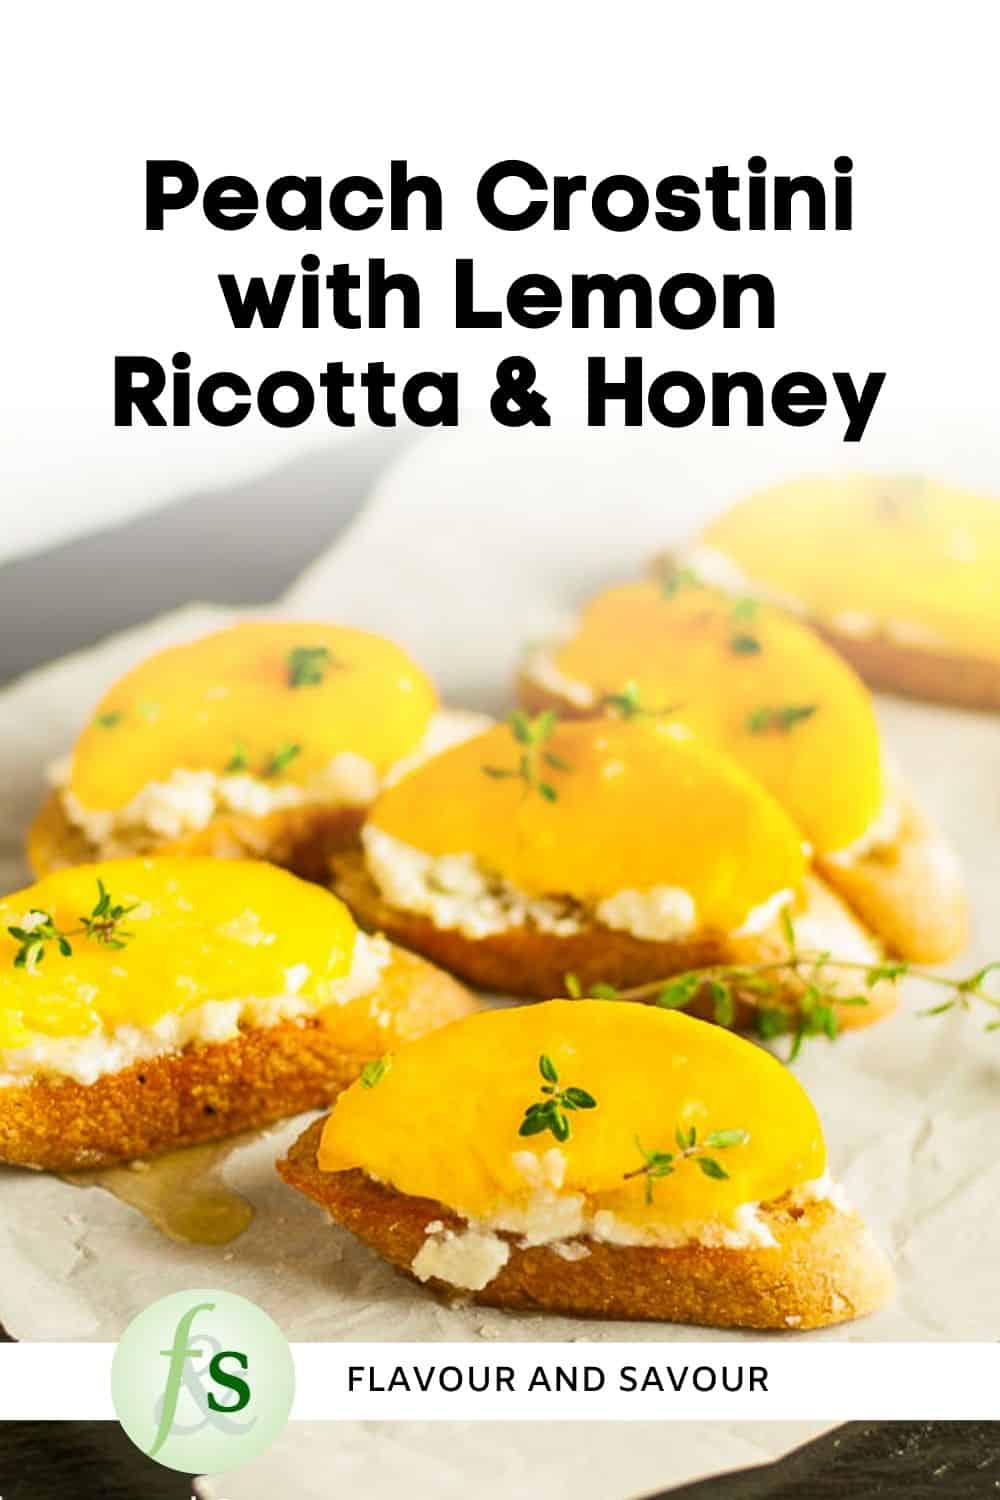 image with text for peach crostini with lemon ricotta and honey.